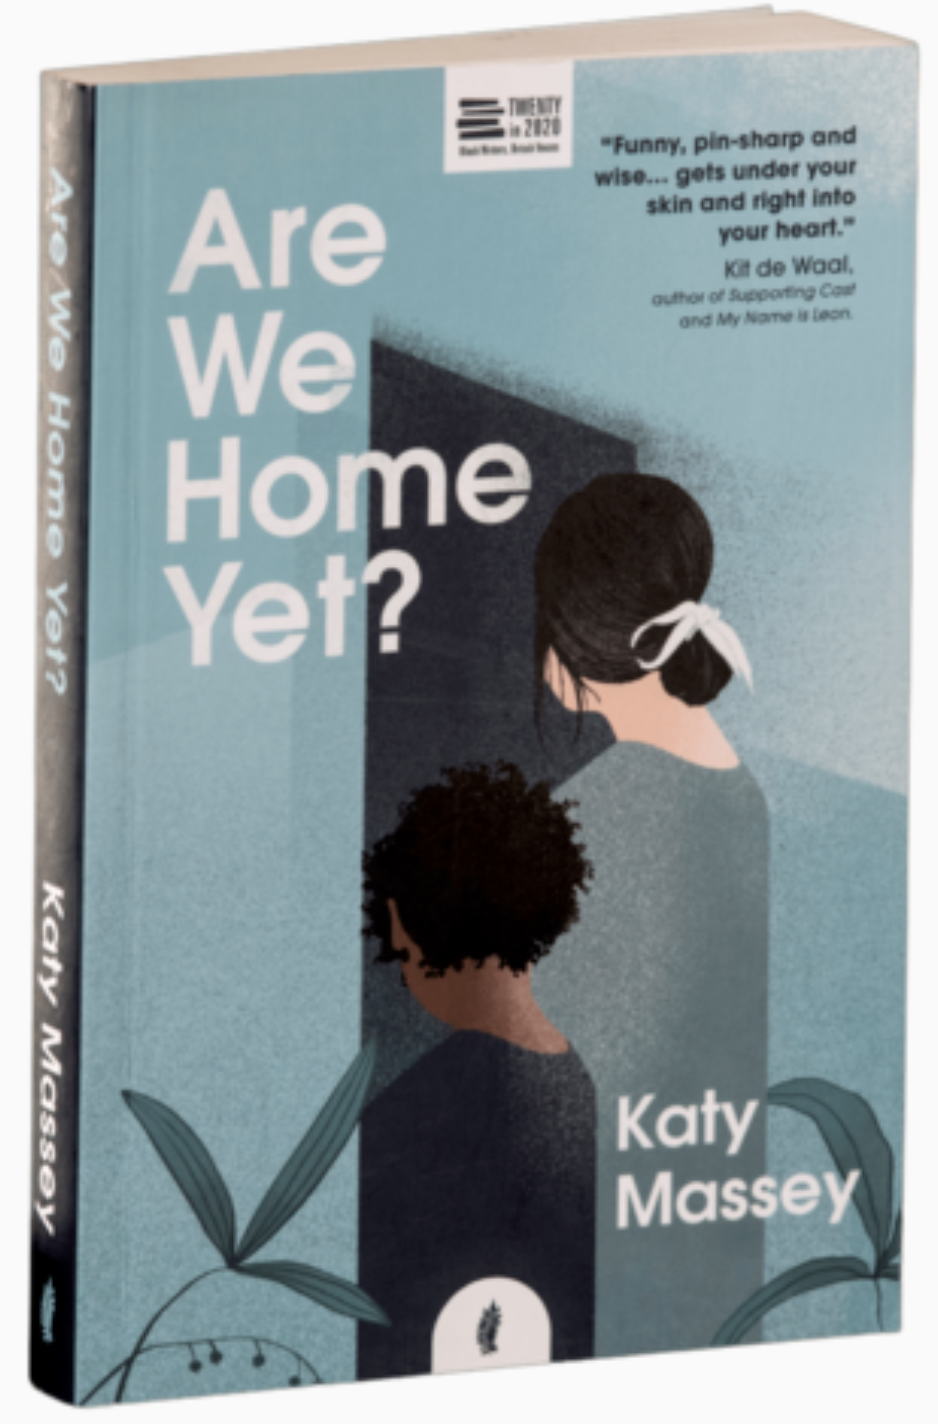 Are We Home Yet? by Katy Massey